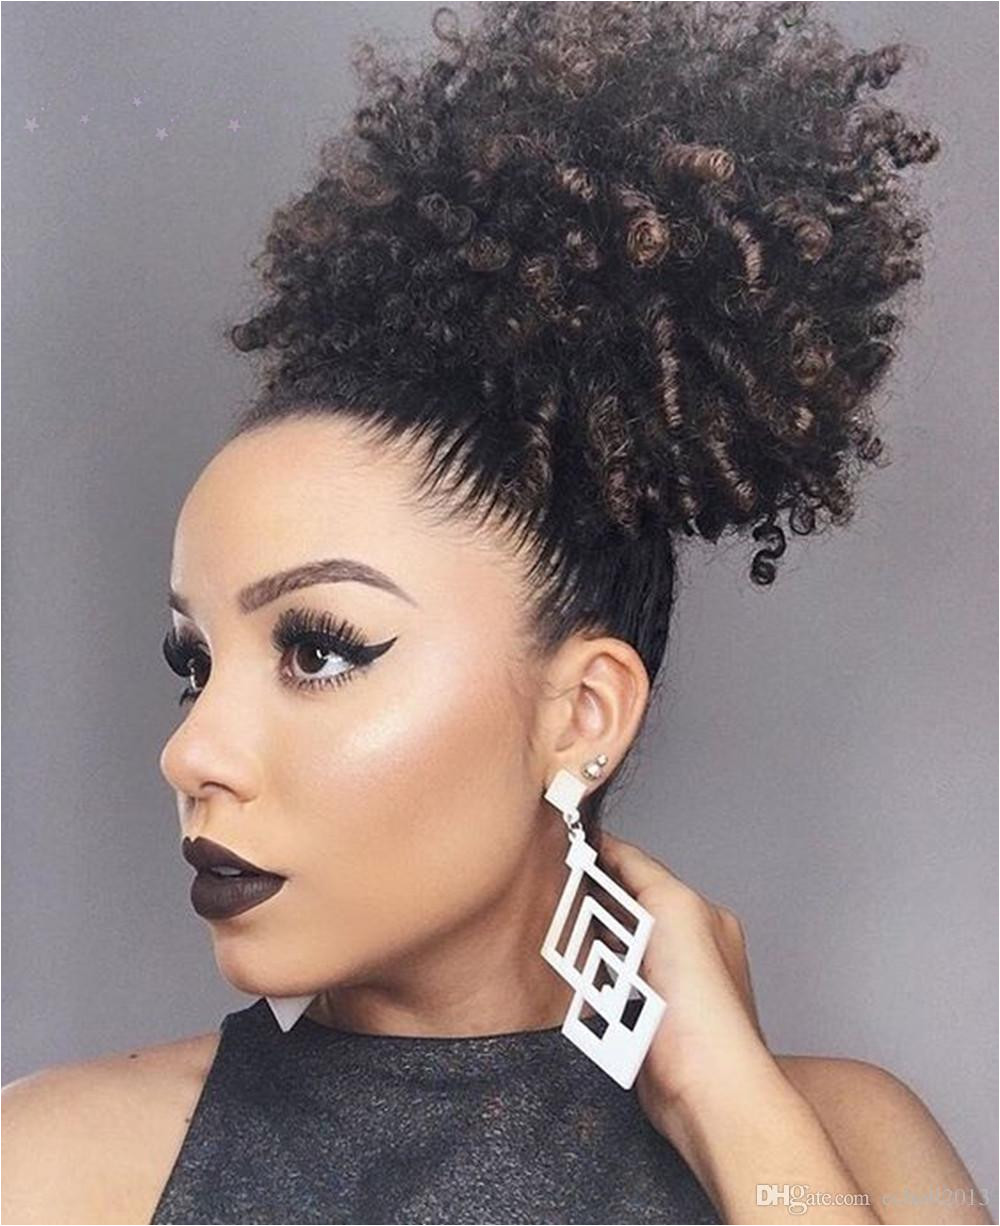 Short High Afro Ponytail Clip In Afro Kinky Curly Hair Drawstring Pony Tail Brazilian Virgin Hair Extension 120g For Black Women Wrap Around Ponytails Luxe